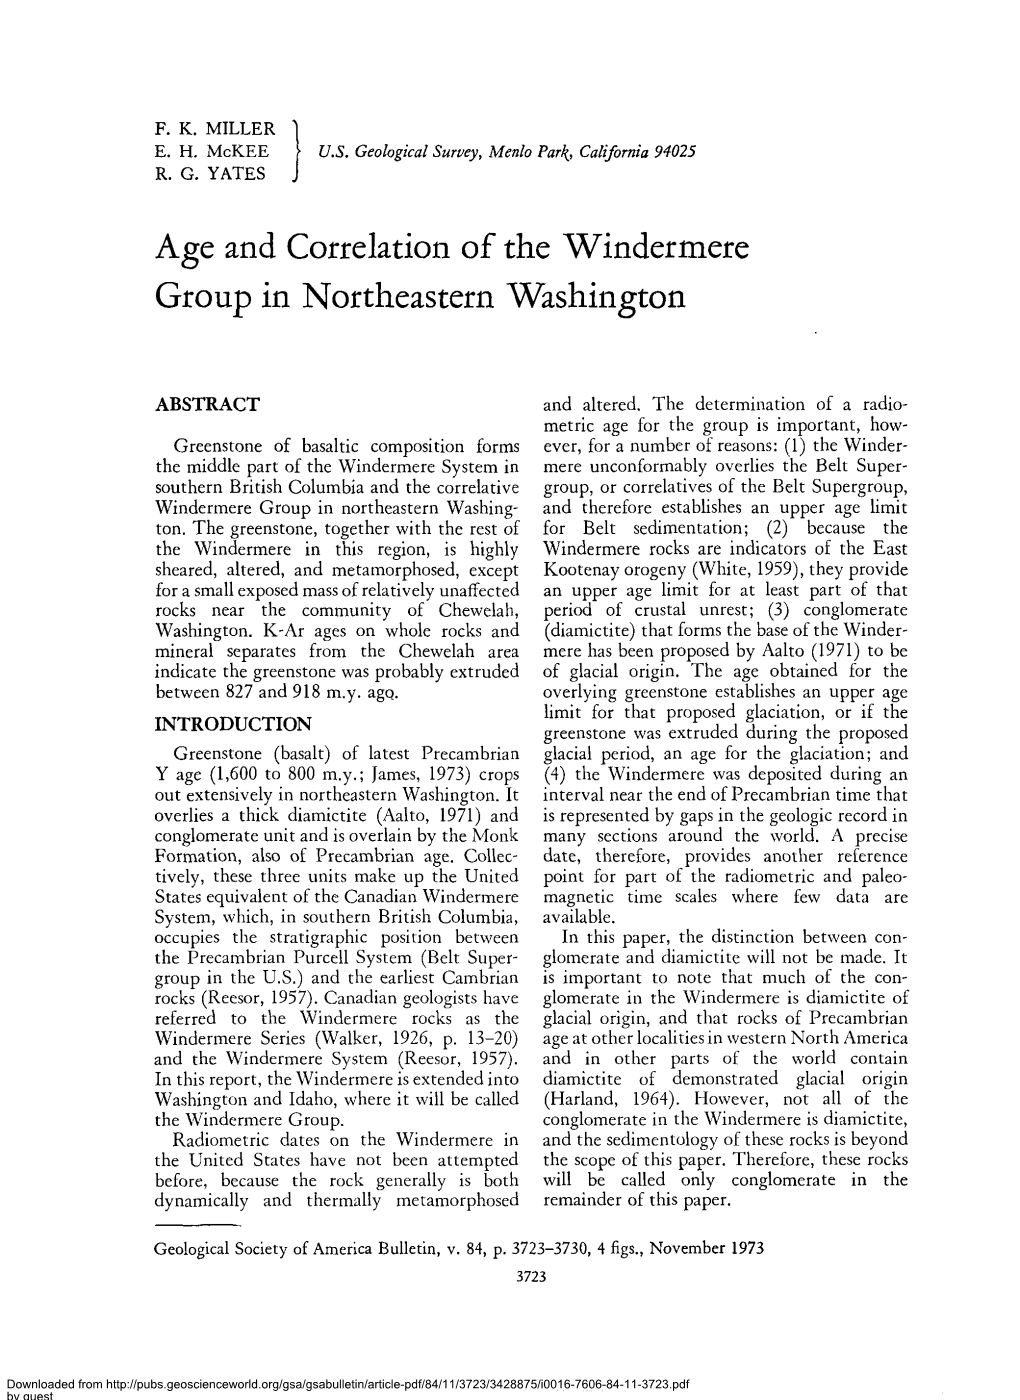 Age and Correlation of the Windermere Group in Northeastern Washington